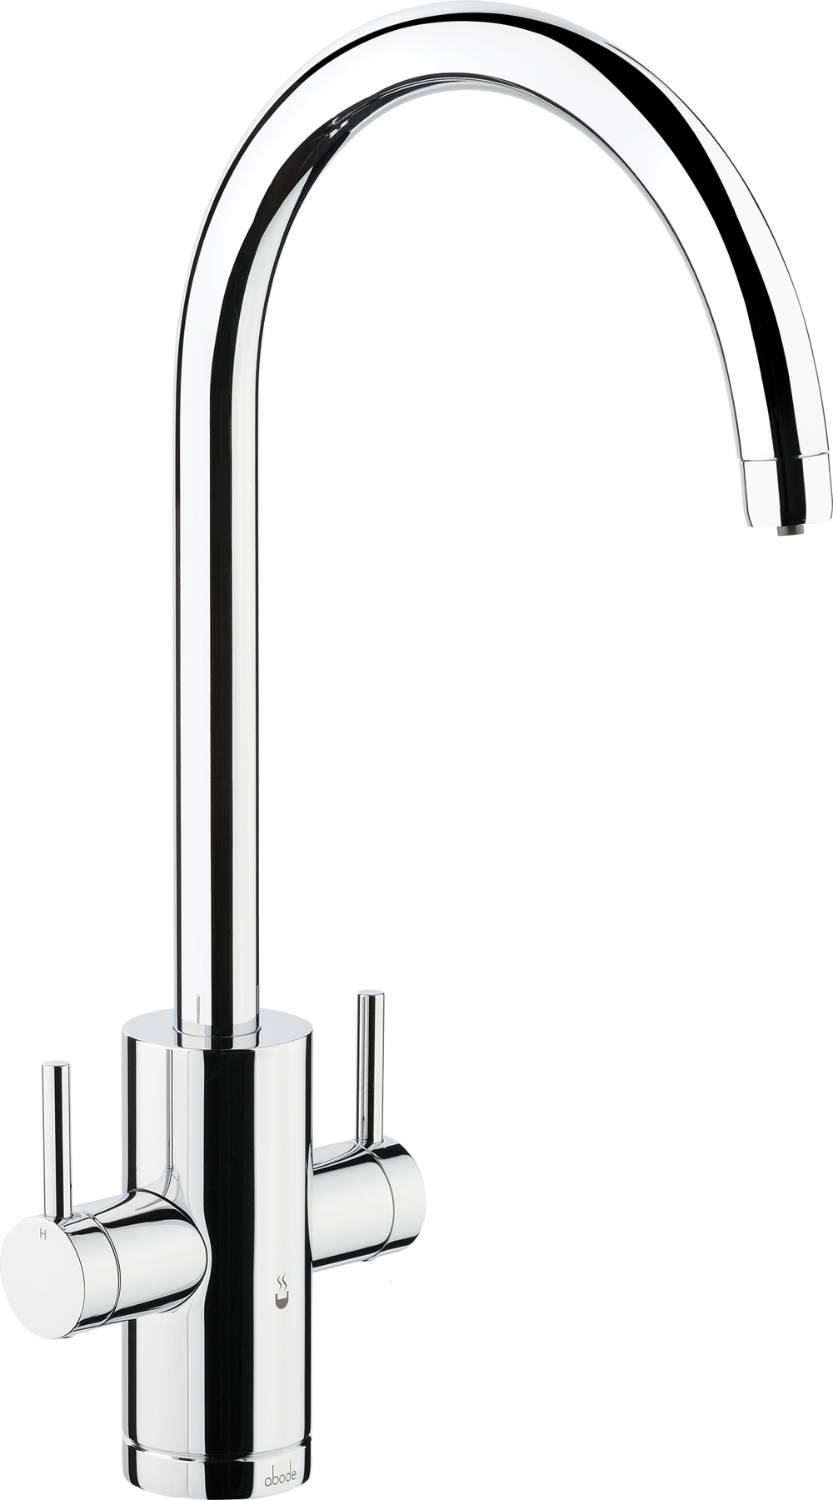 PRONTEAU™ Profile - 4 in 1 Steaming Hot Water Tap